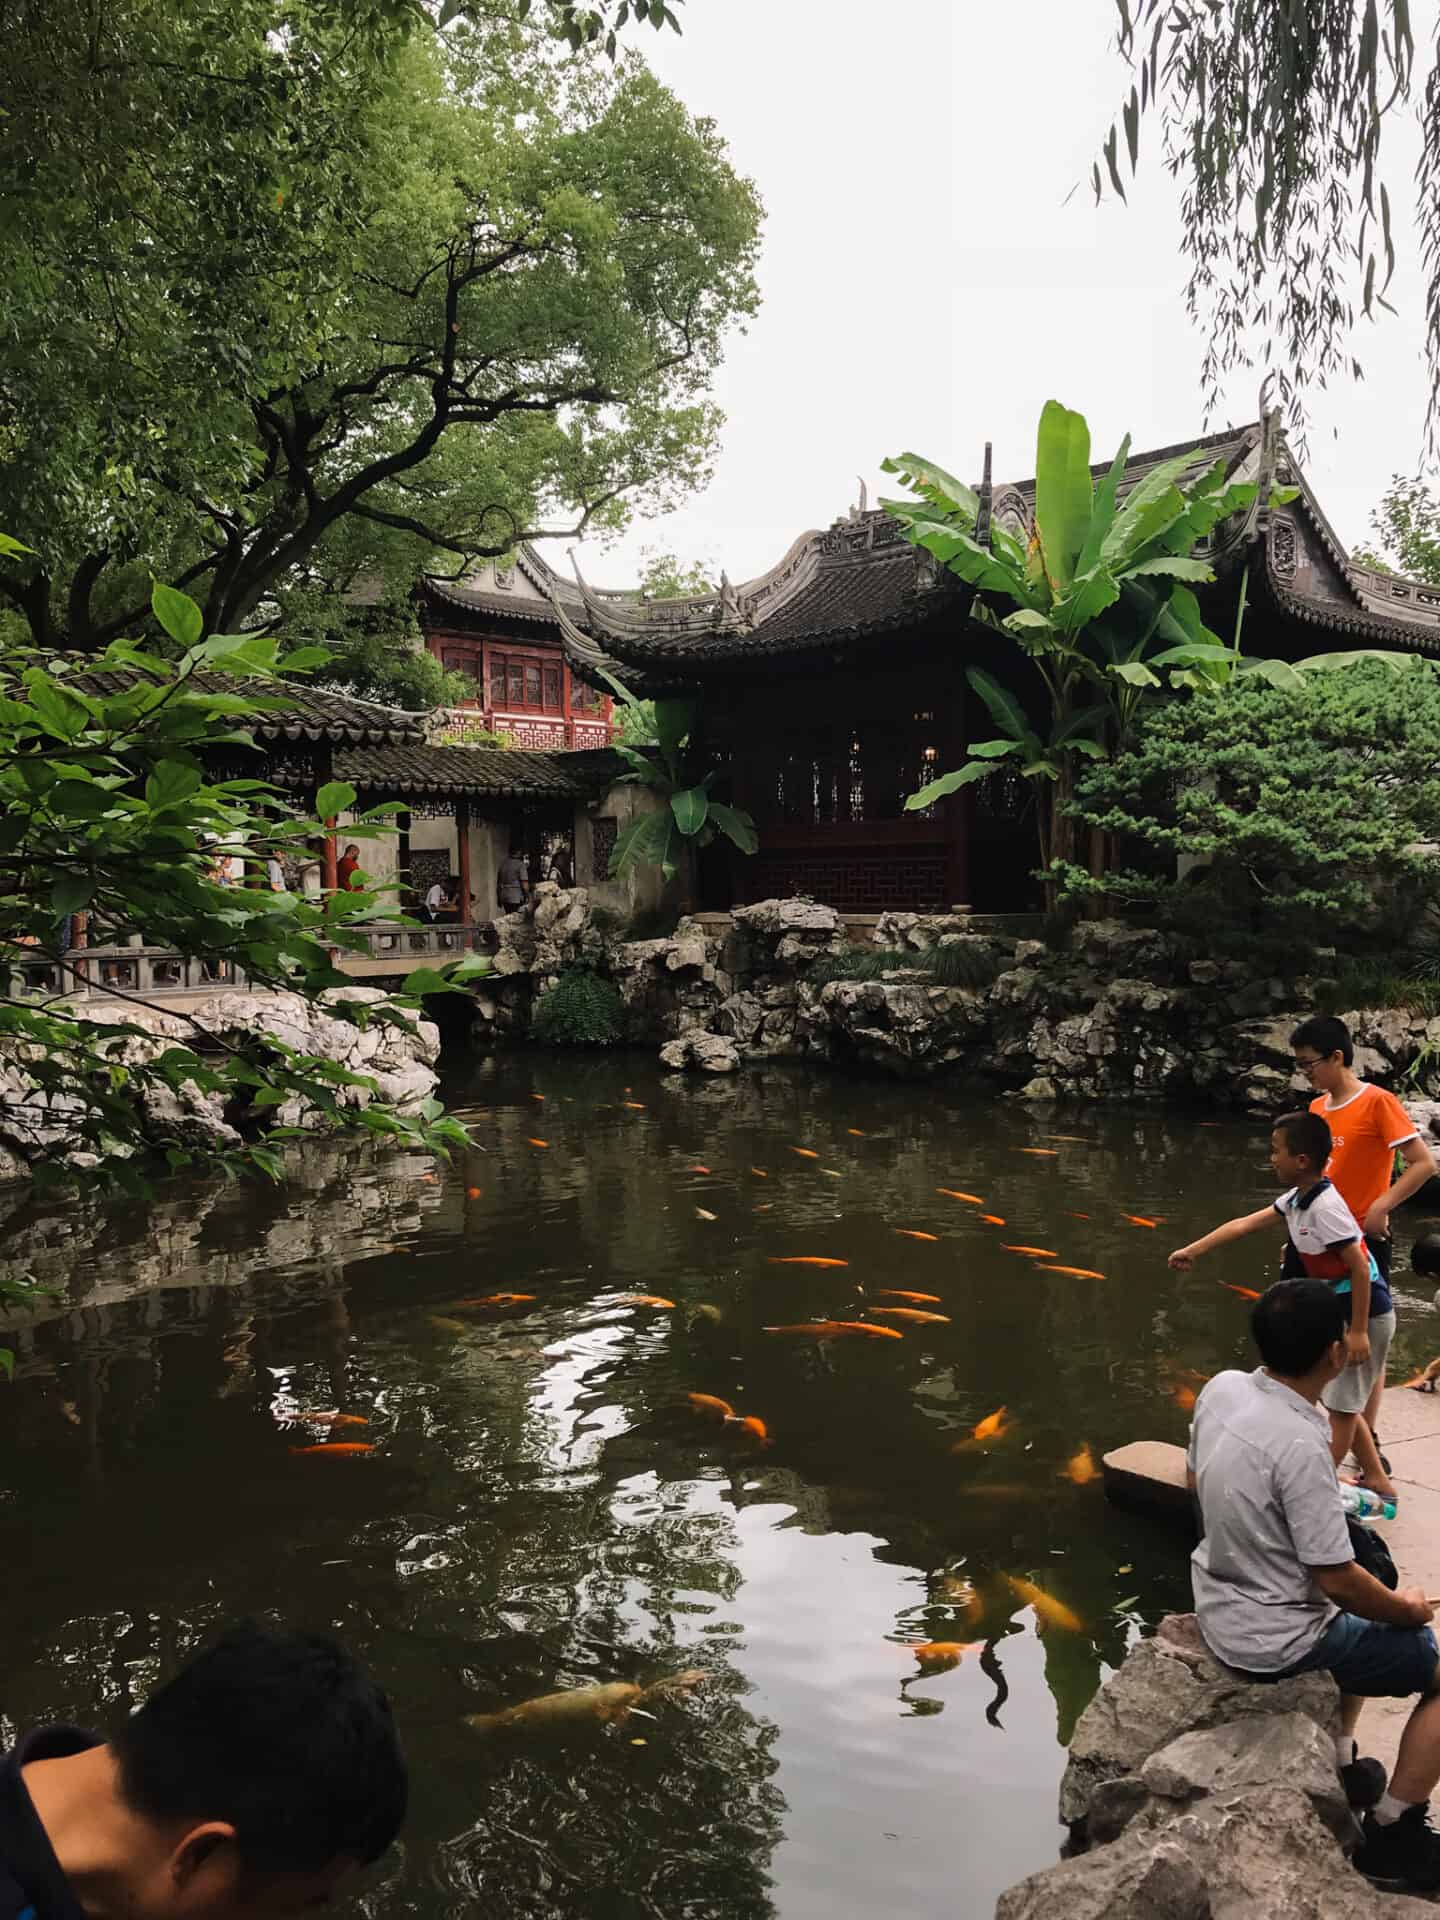 Pond with orange fish in Chenghuang Temple